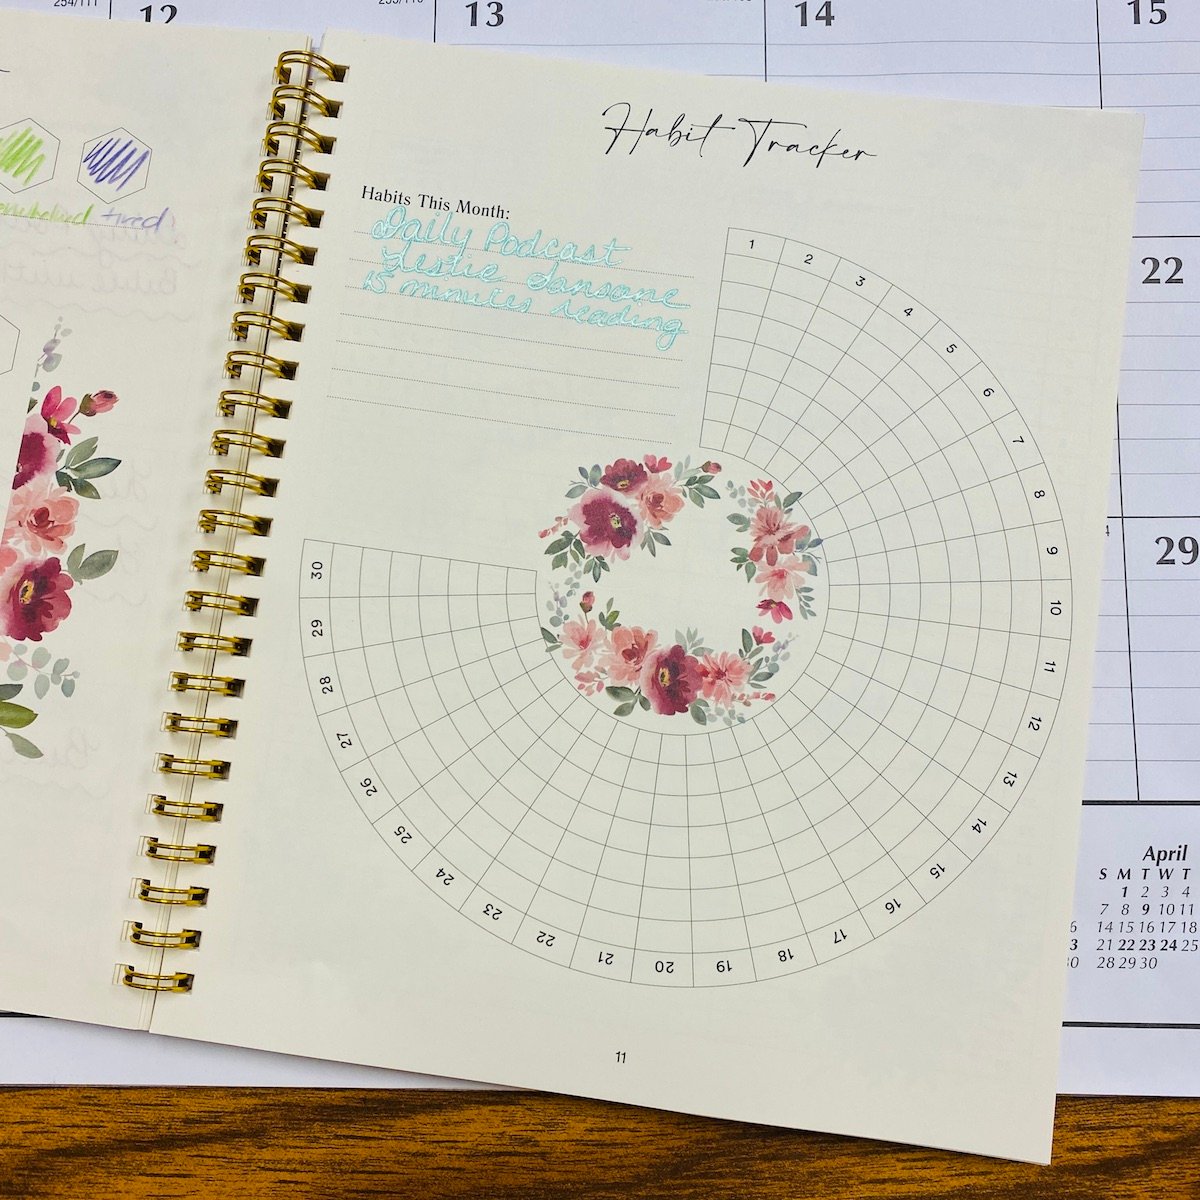 What Is A Habit Tracker, And How Should I Use It? – Silk + Sonder